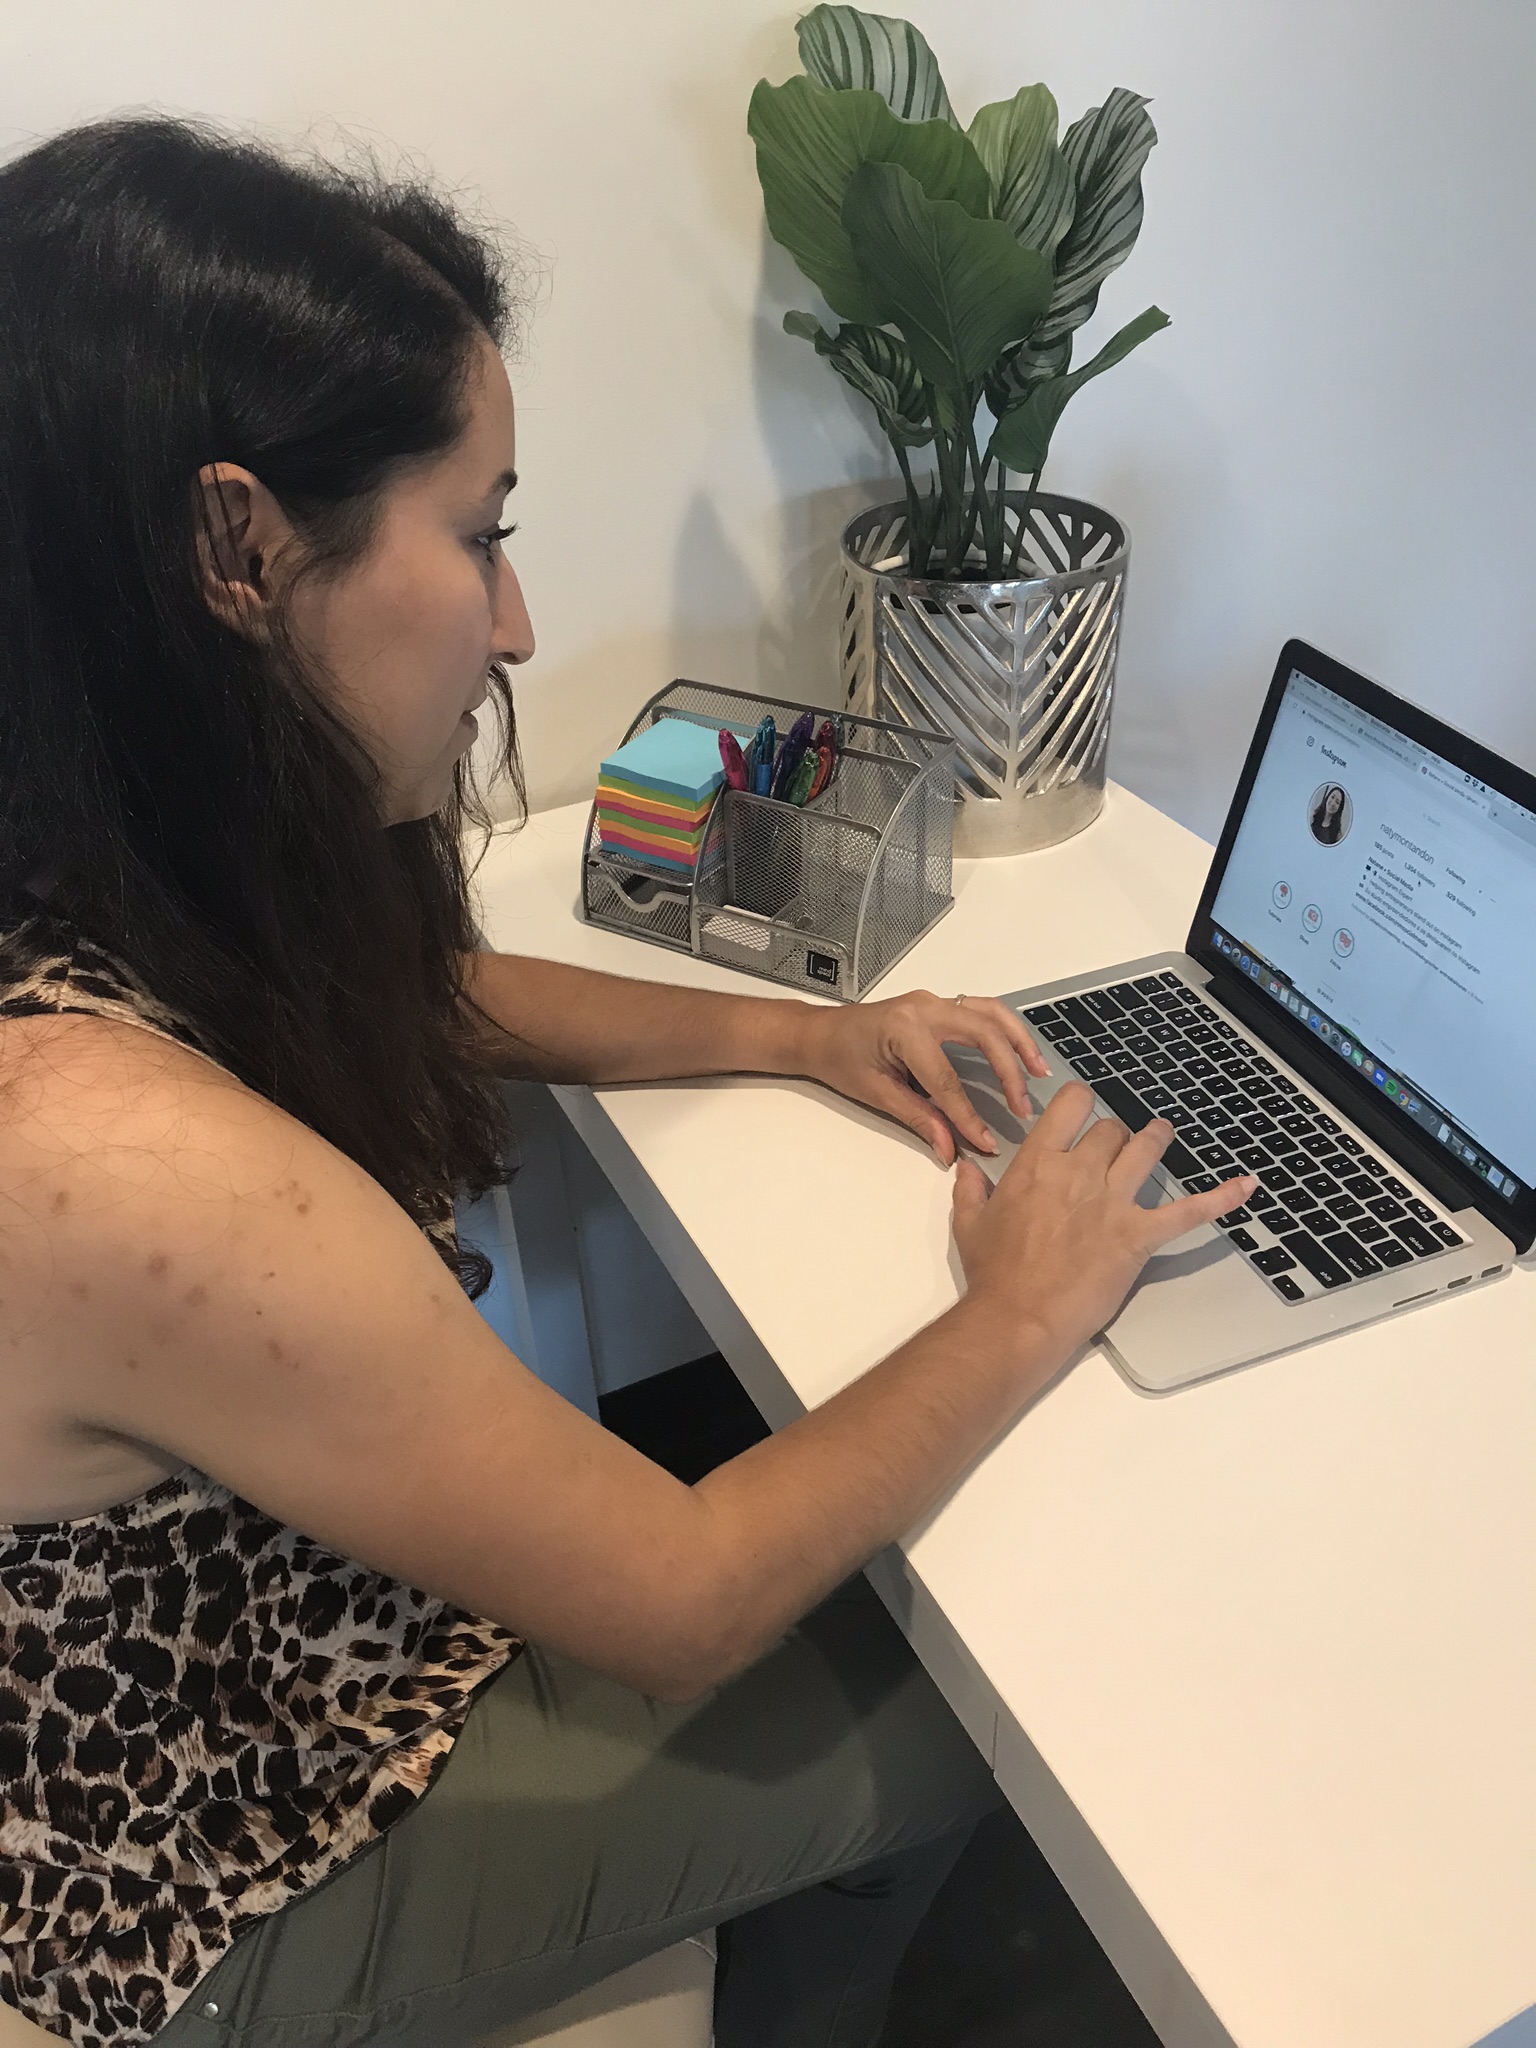 Instagram Expert Naty Montandon on her computer at a desk